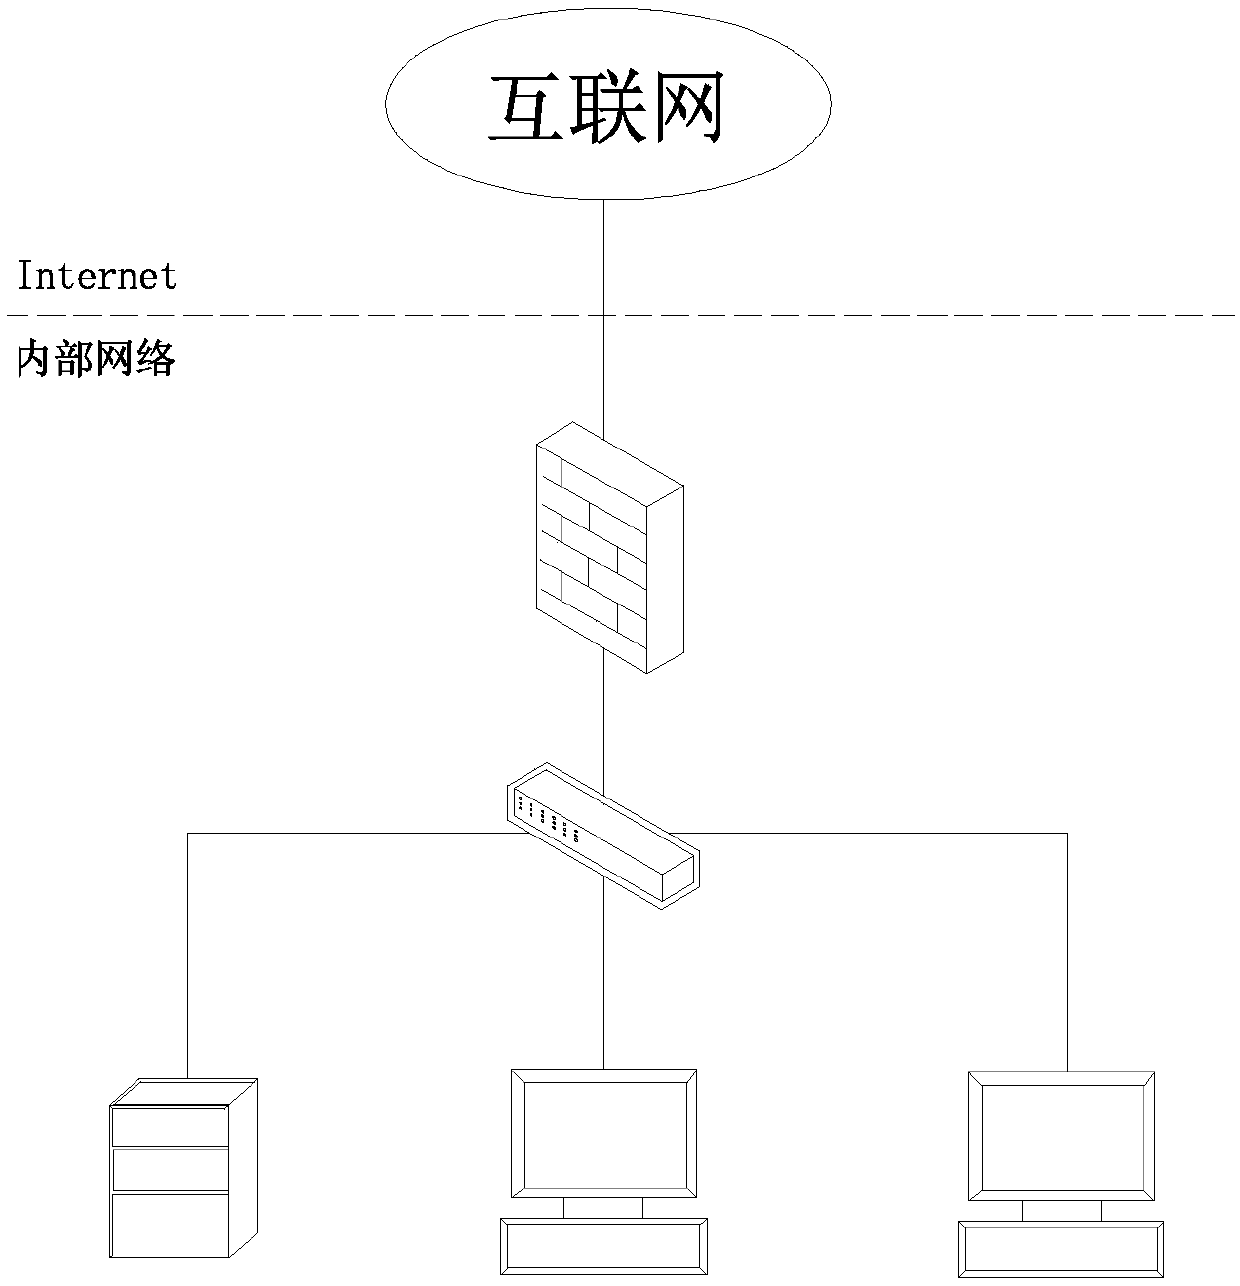 Network flow monitoring method and system